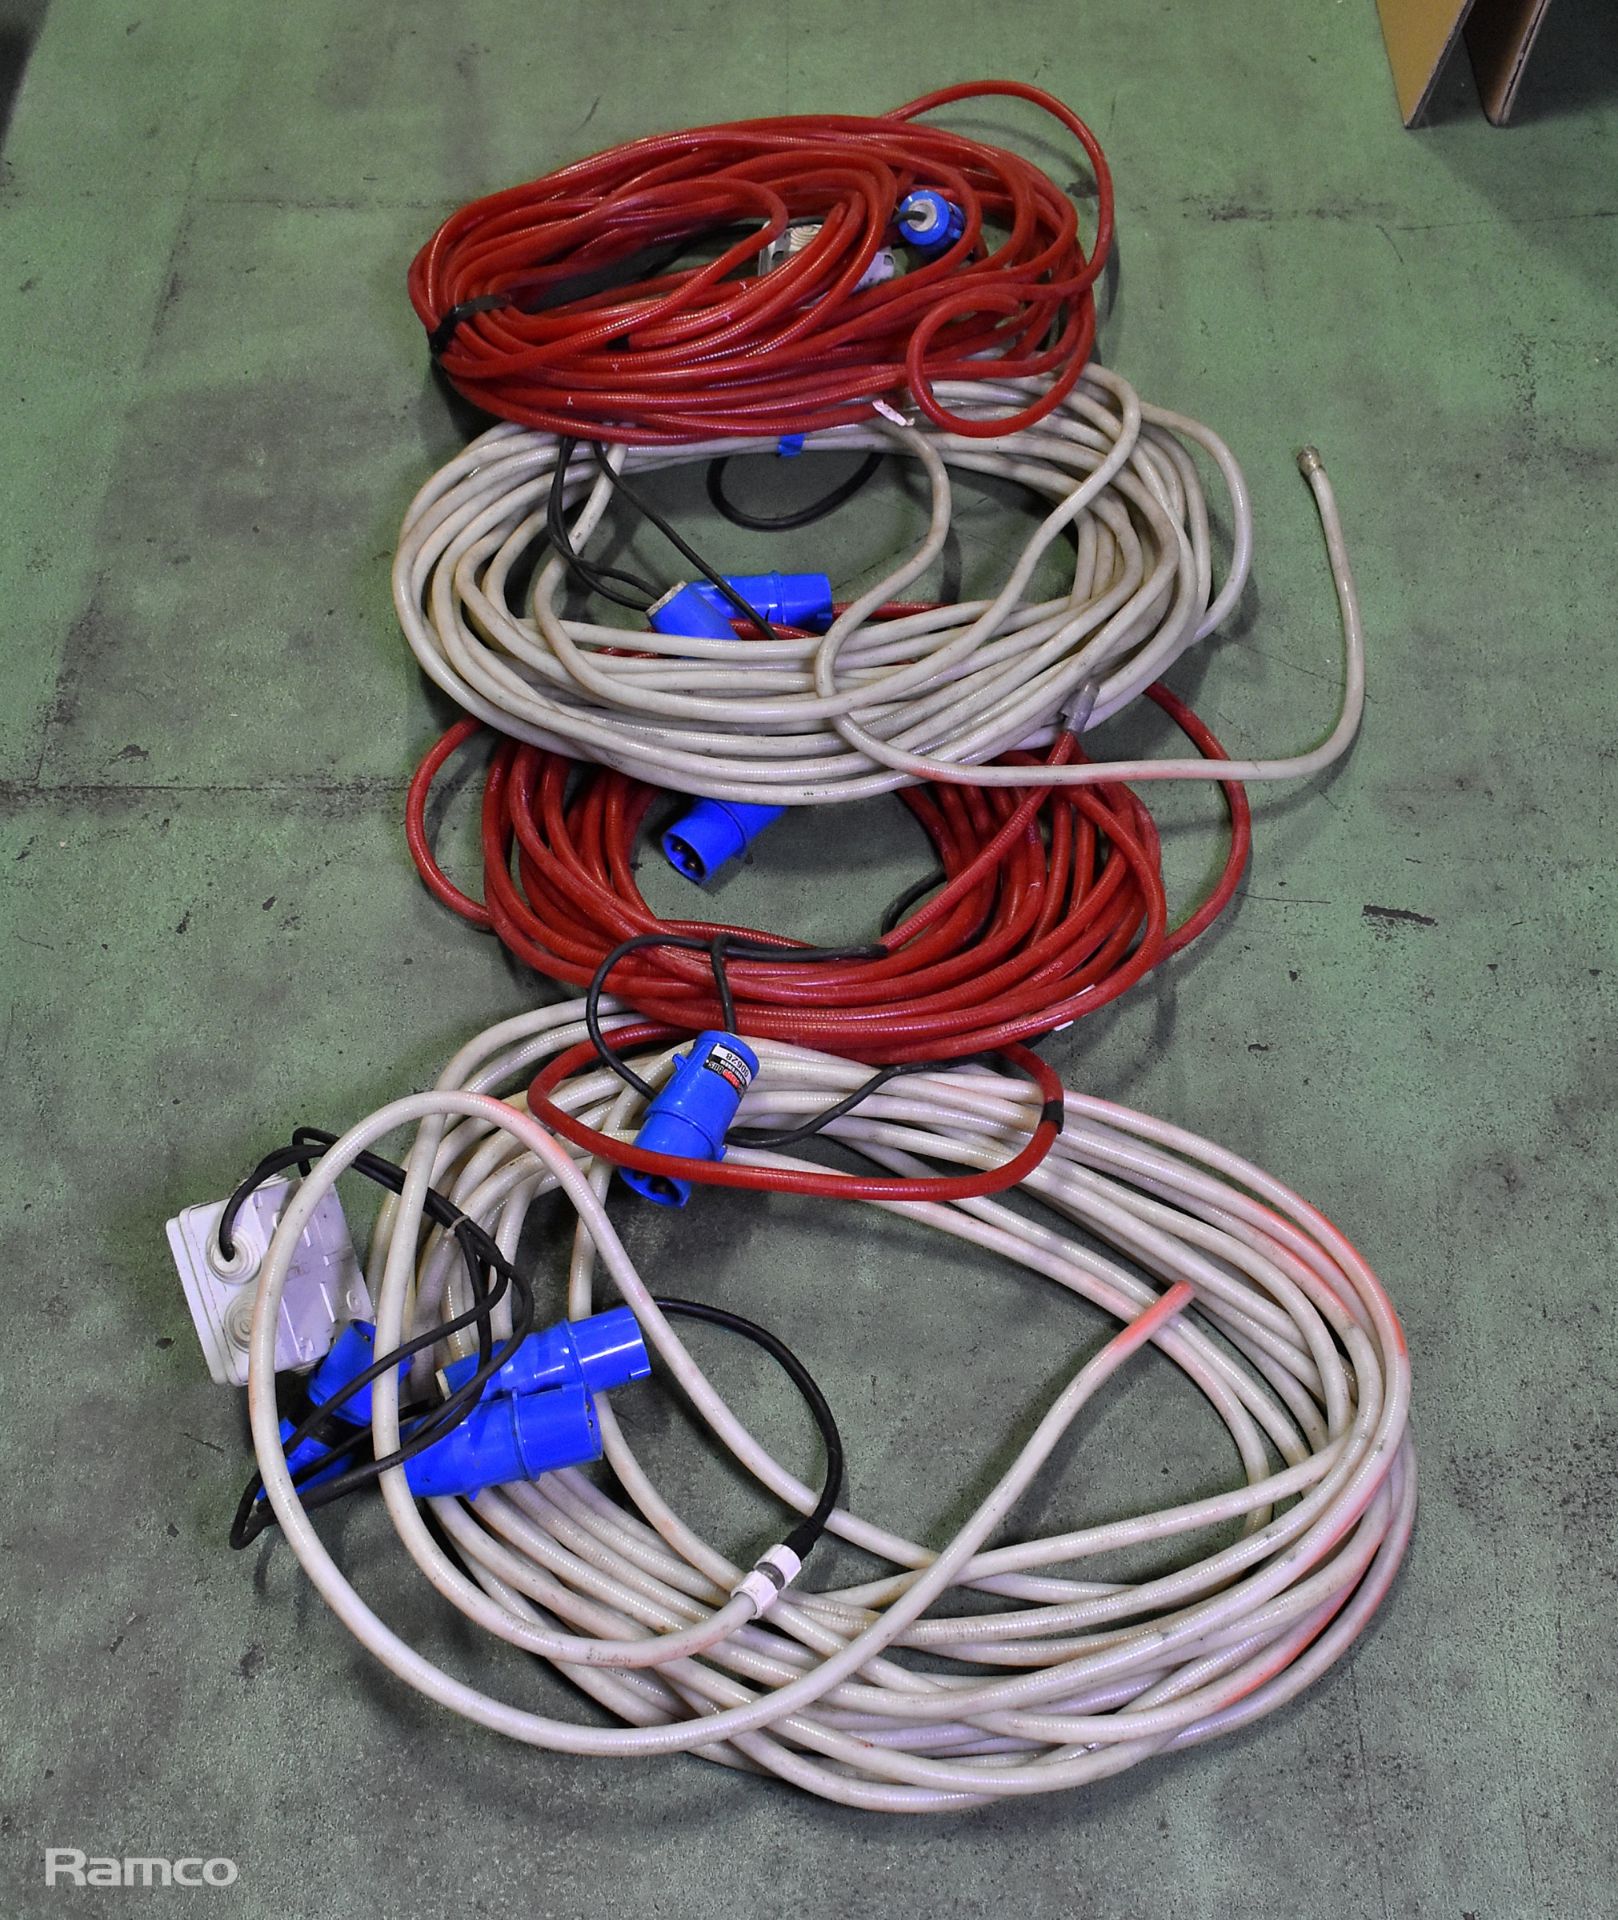 Professional 230V rope light with assorted colours, Red & white - unknown length